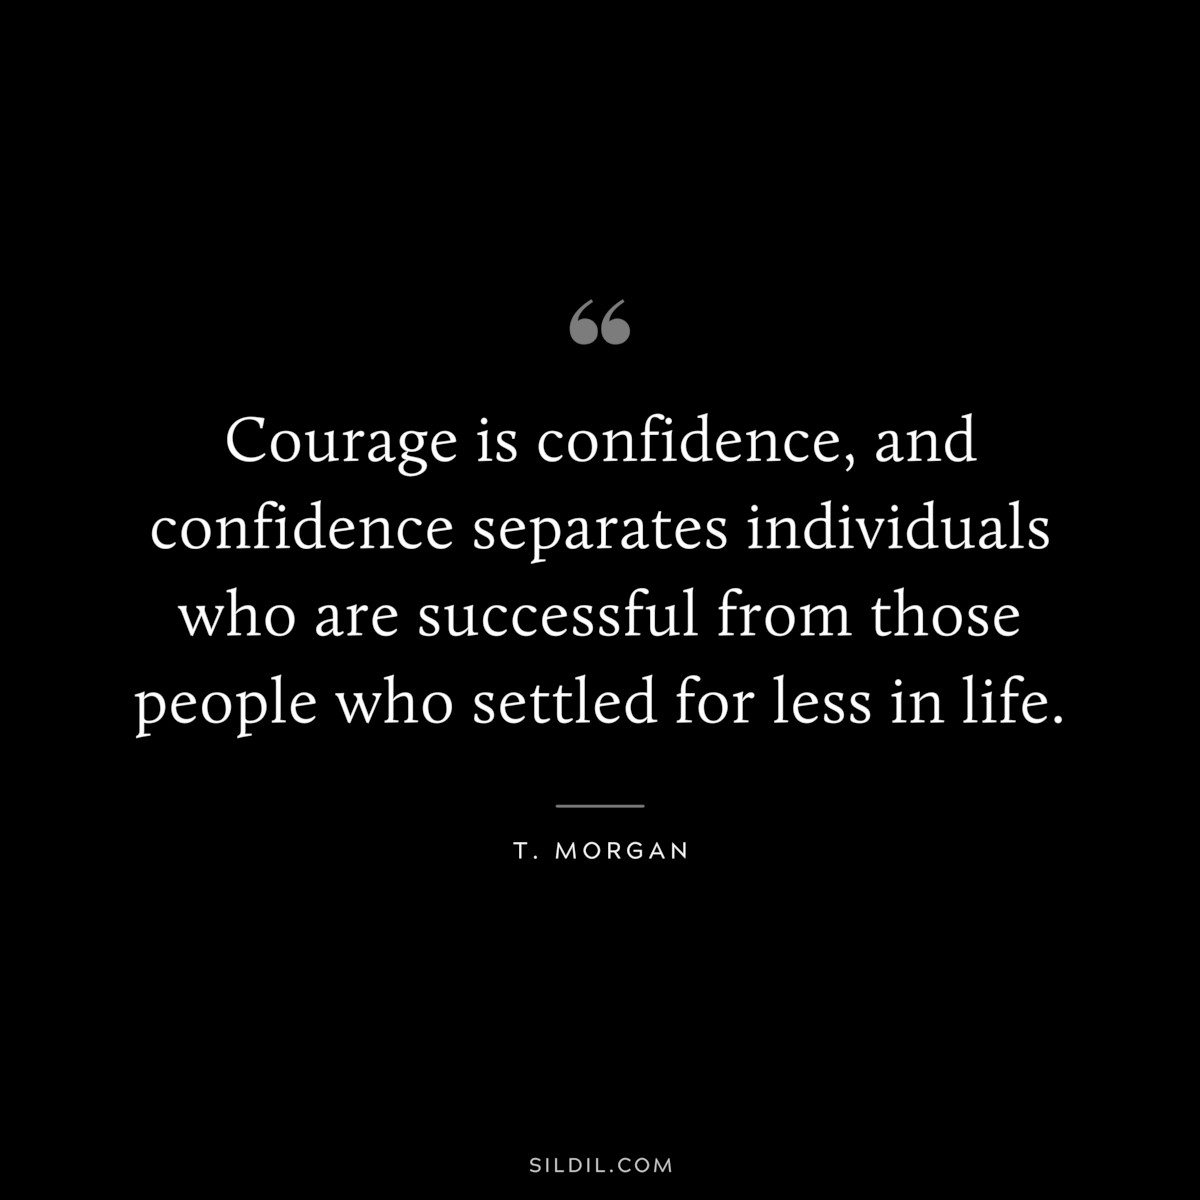 Courage is confidence, and confidence separates individuals who are successful from those people who settled for less in life. ― T. Morgan